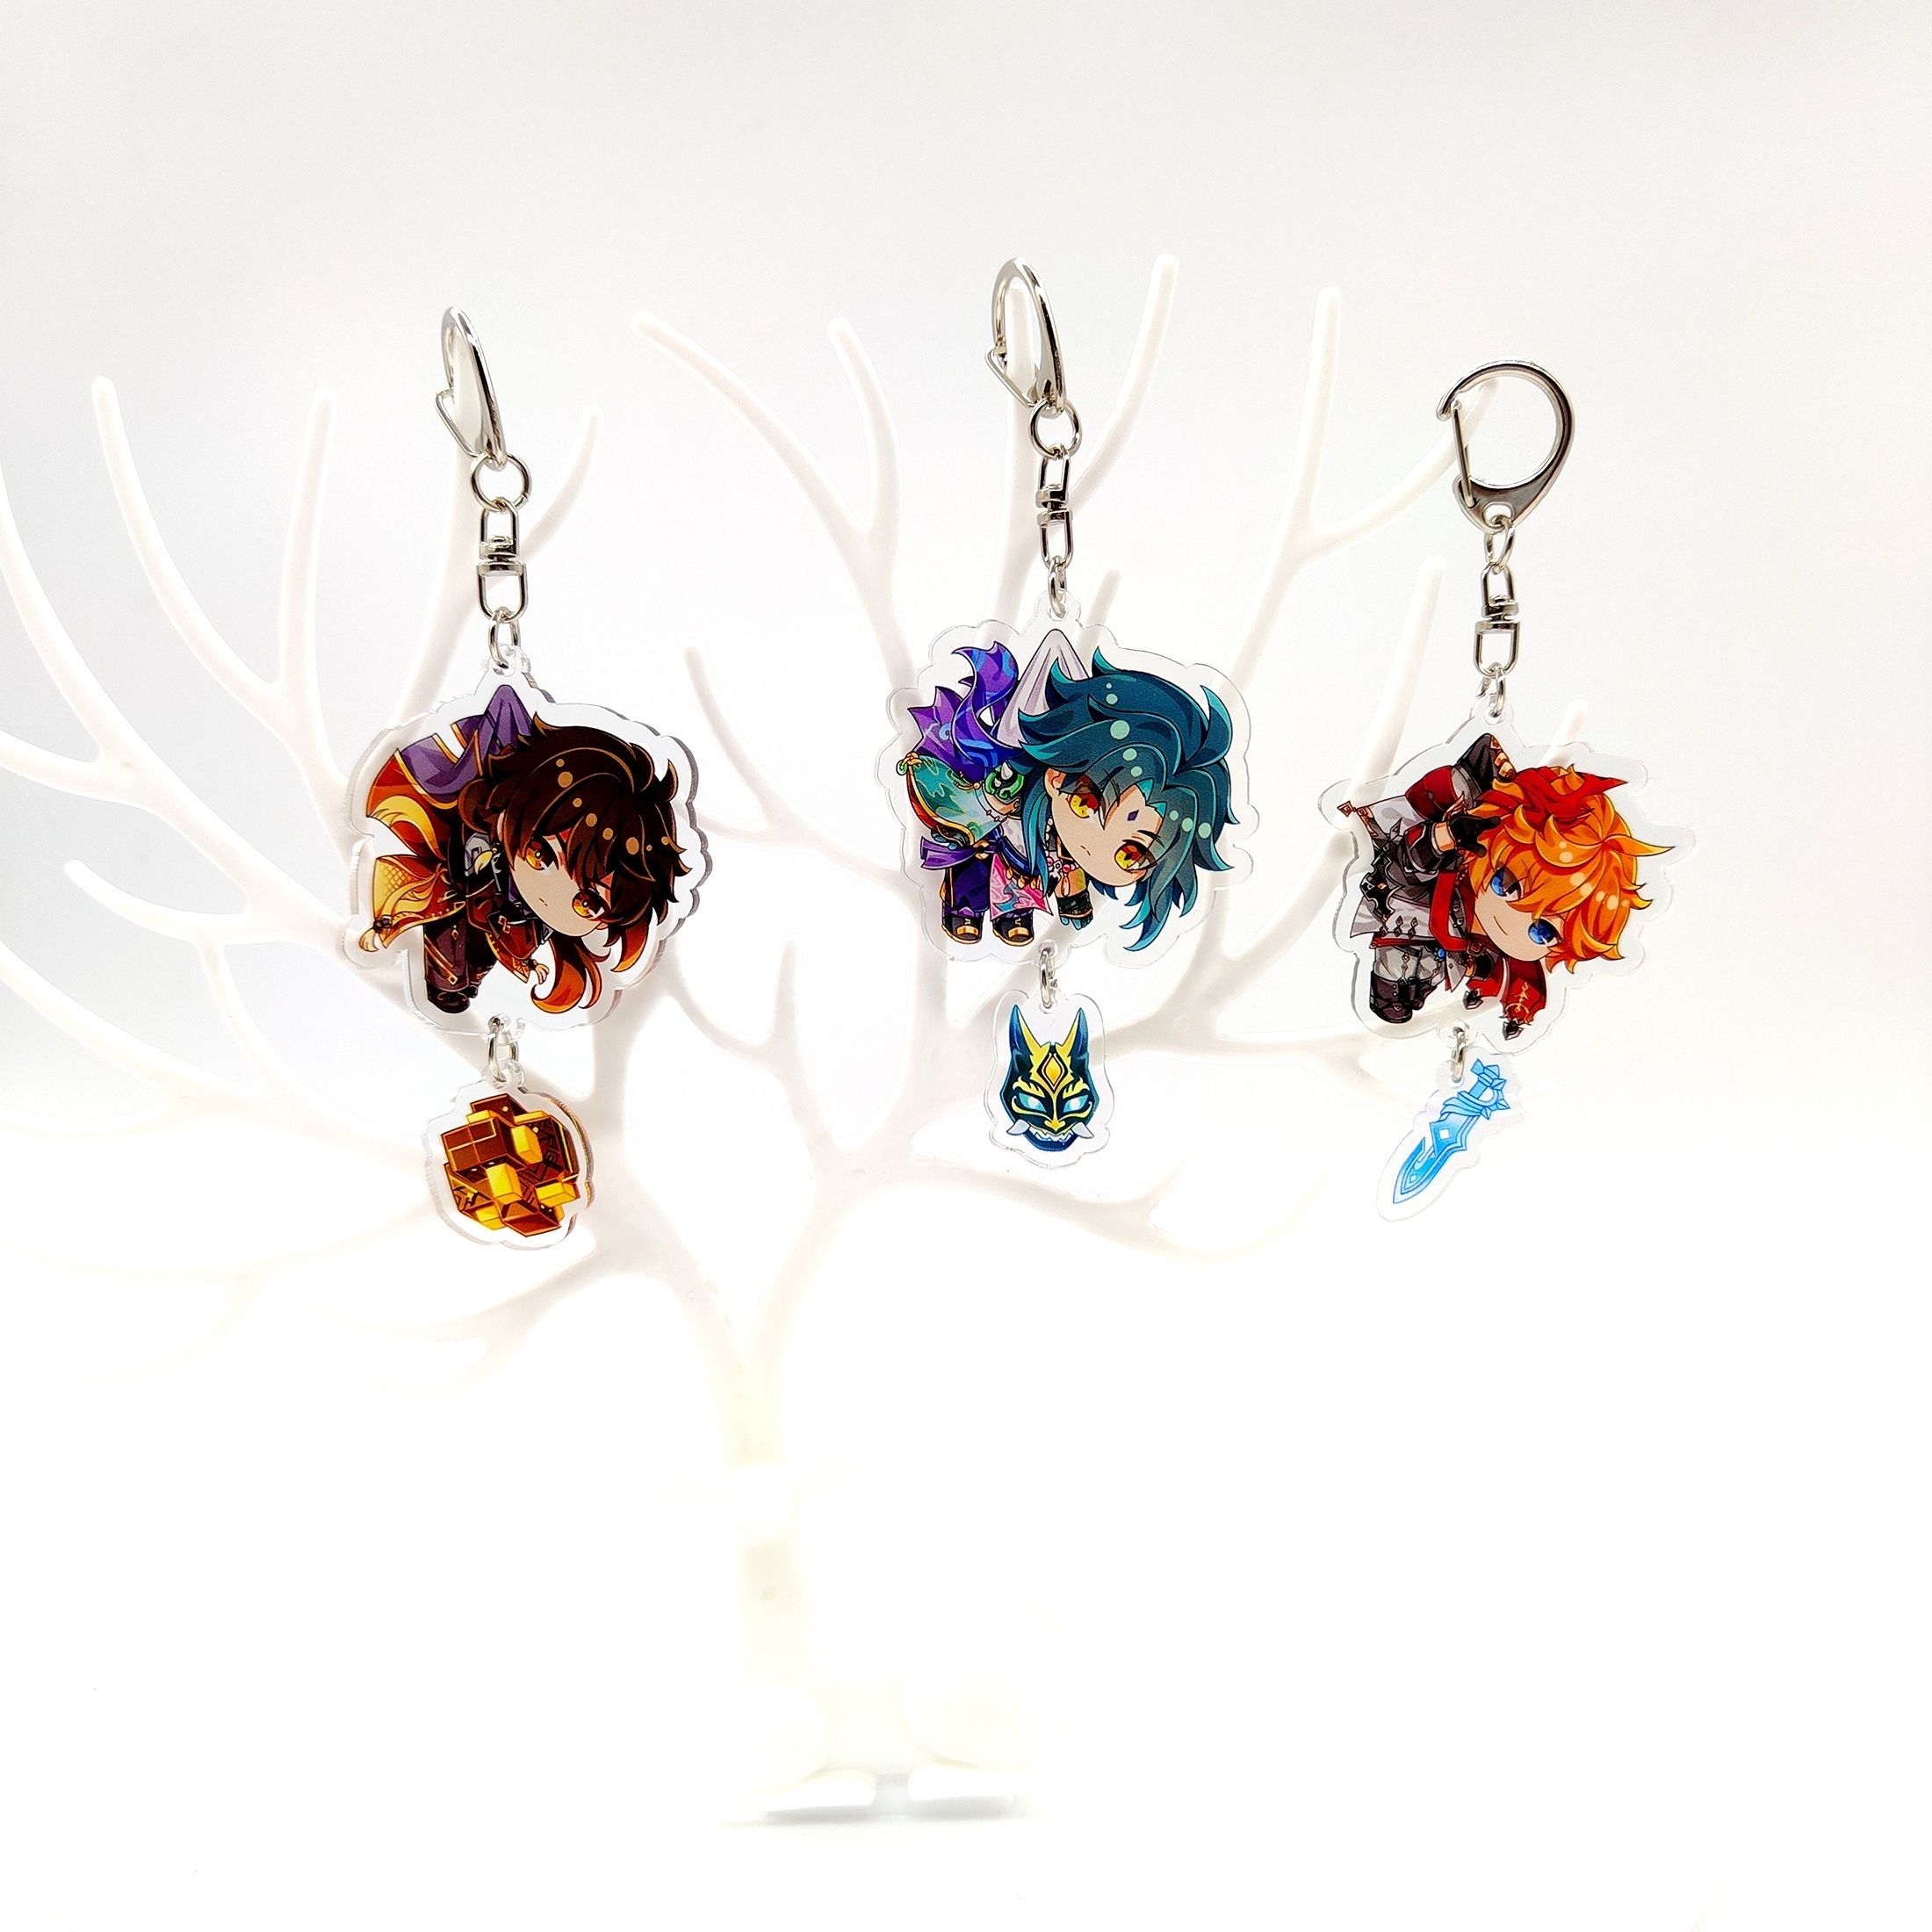 Anime/Video Game Themed Acrylic Charms by Kelly — Kickstarter